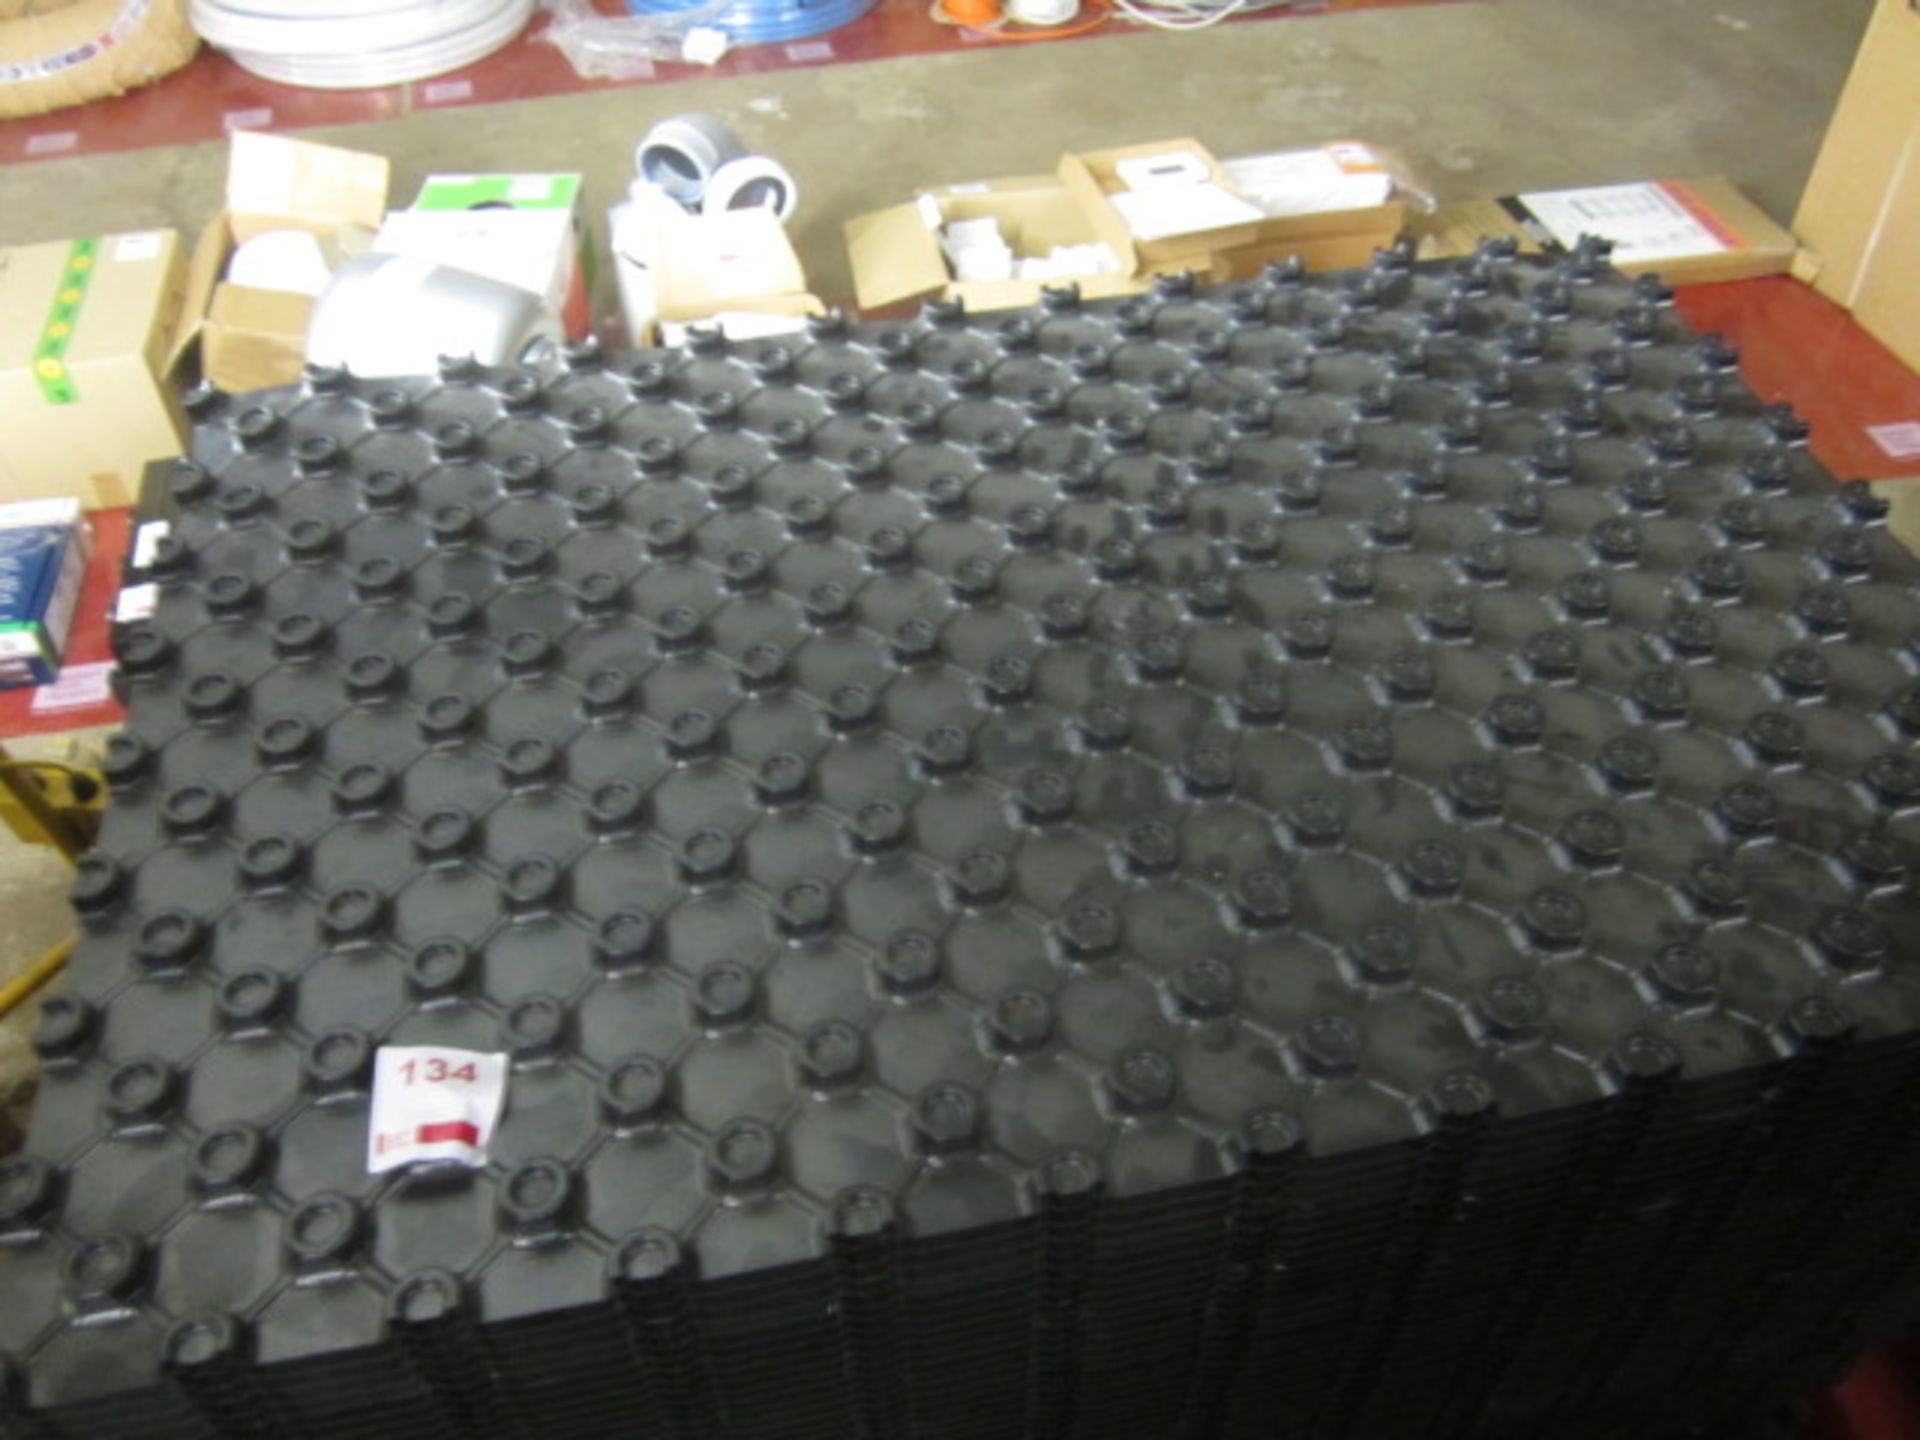 Circa 50 underfloor heat trays, approx. size 4ft x 3ft ** Located: Stoneford Farm, Steamalong - Image 2 of 3